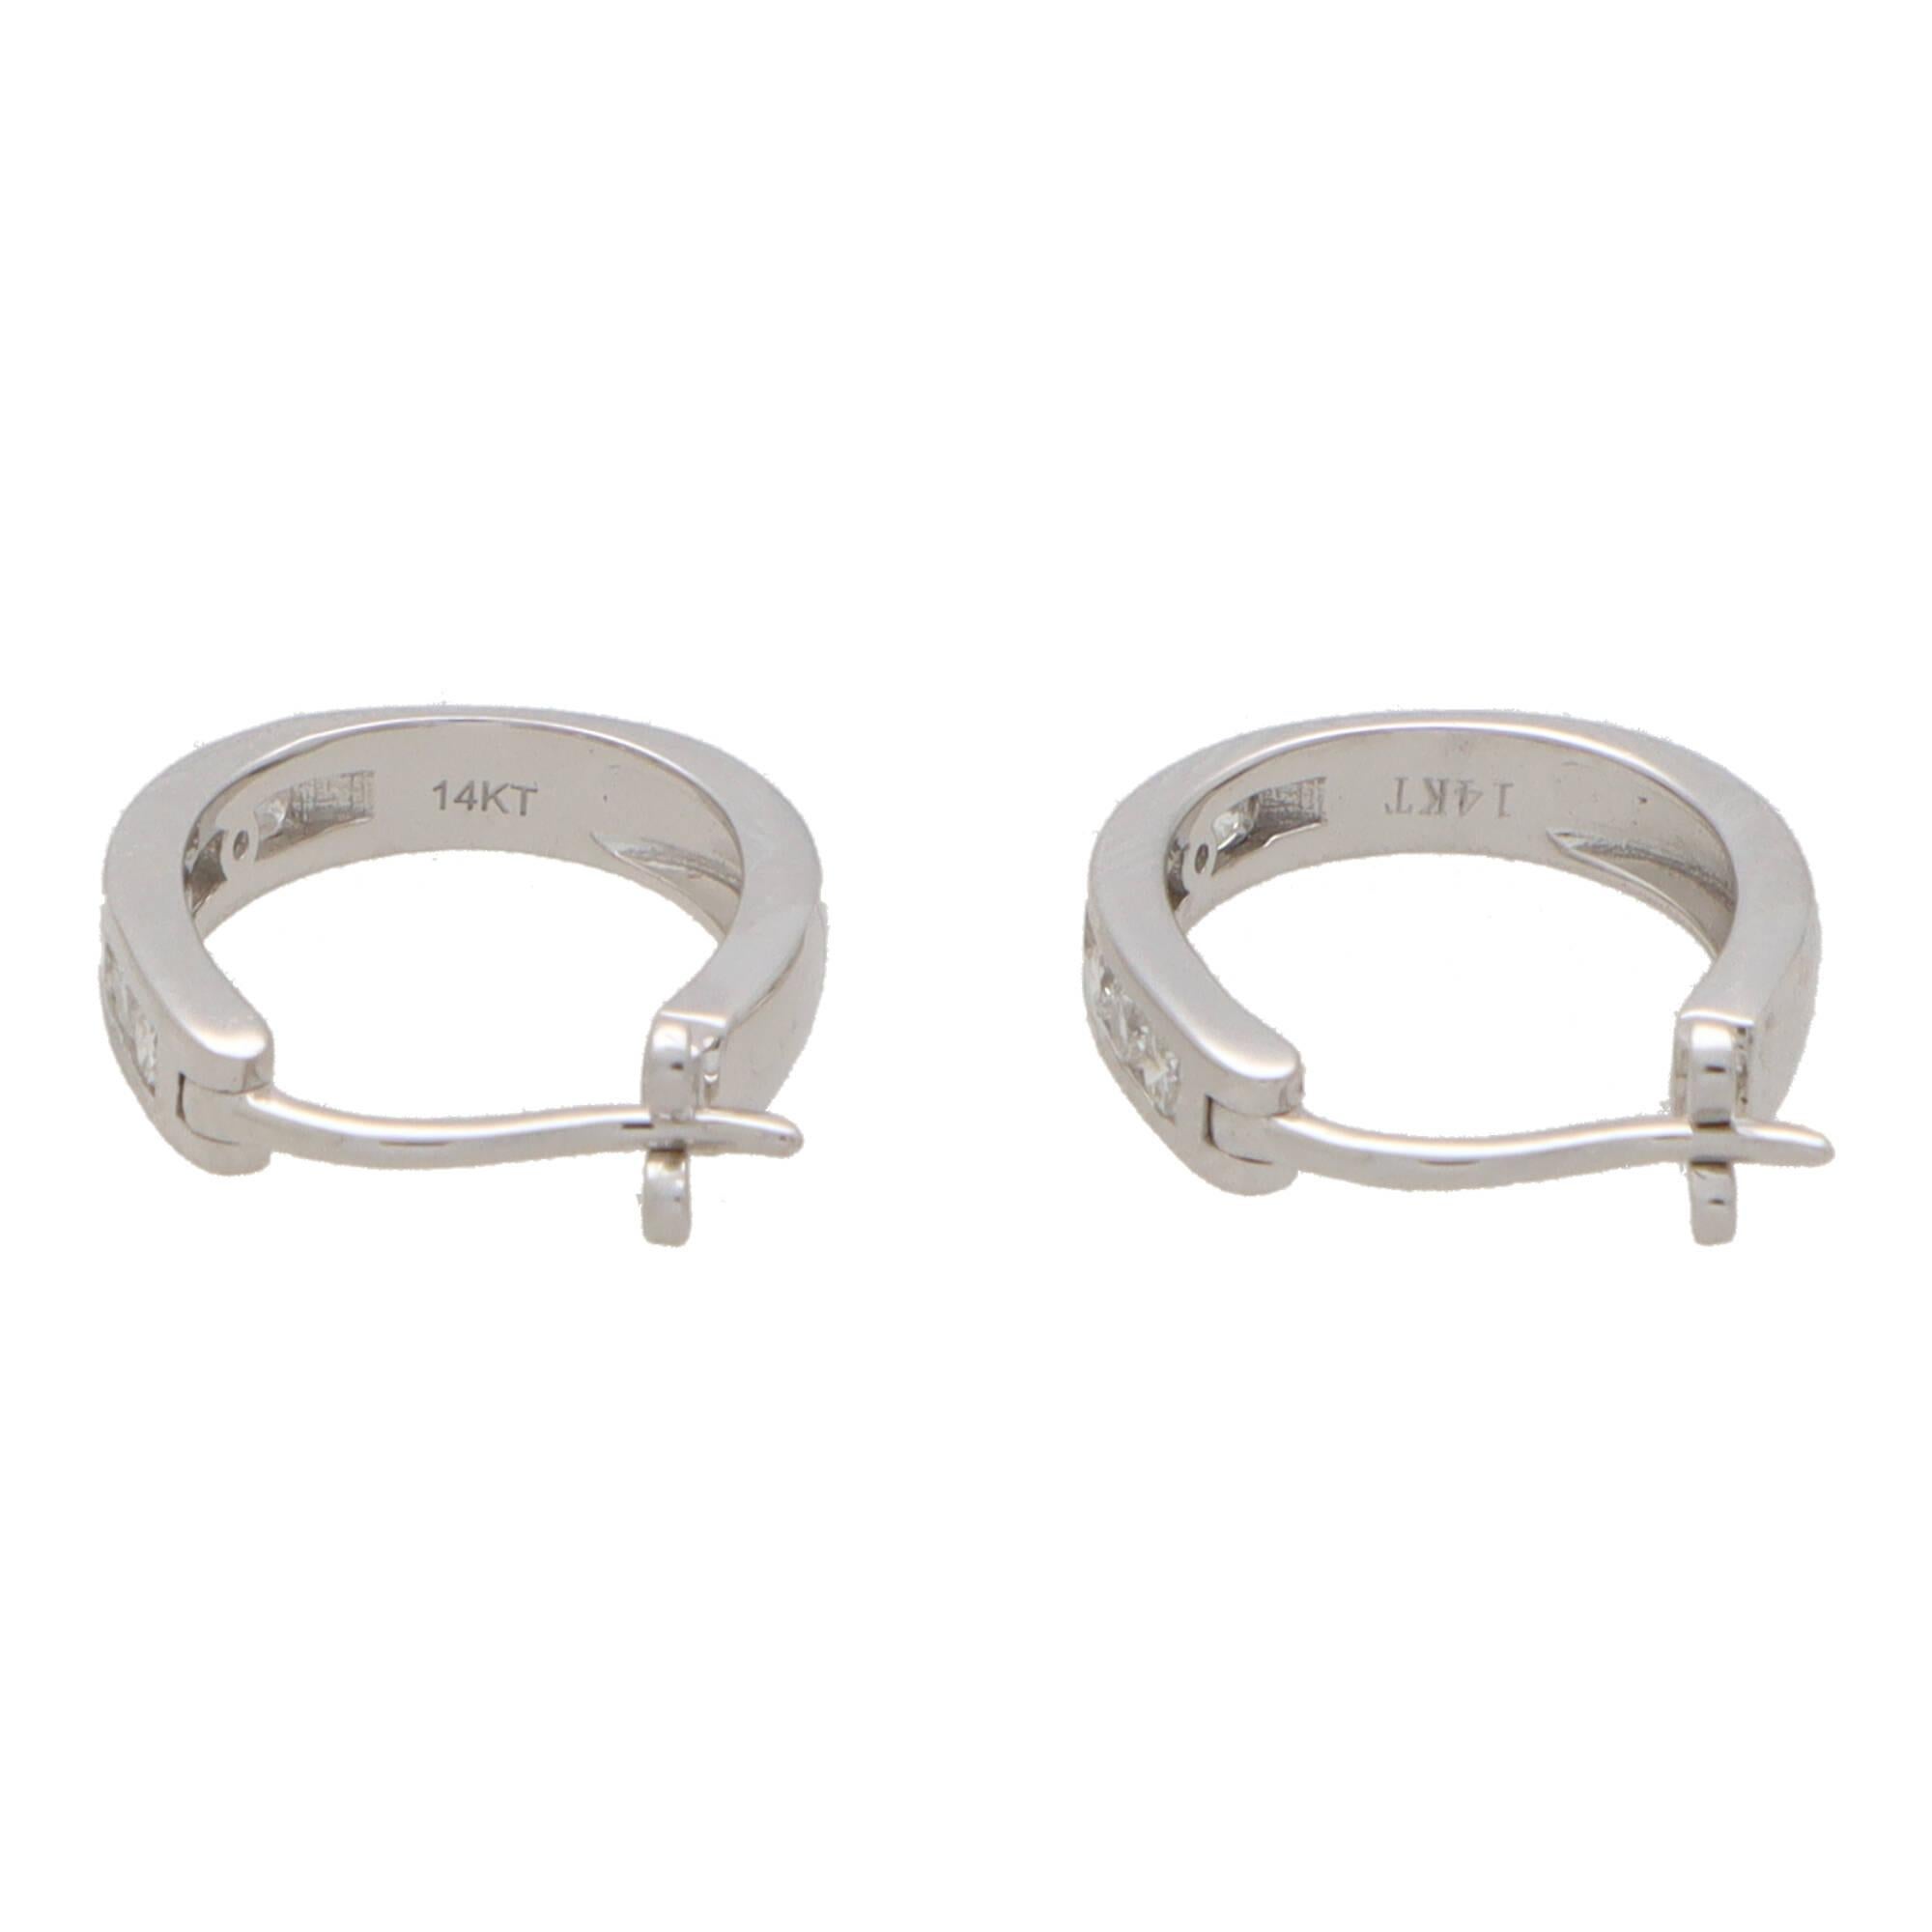 A perfect everyday pair of diamond hoop earrings set in 14k white gold.

The earrings are channel set to the front with seven round brilliant cut diamonds and secured with a post and click shut fitting.

Due to the design and size these earrings